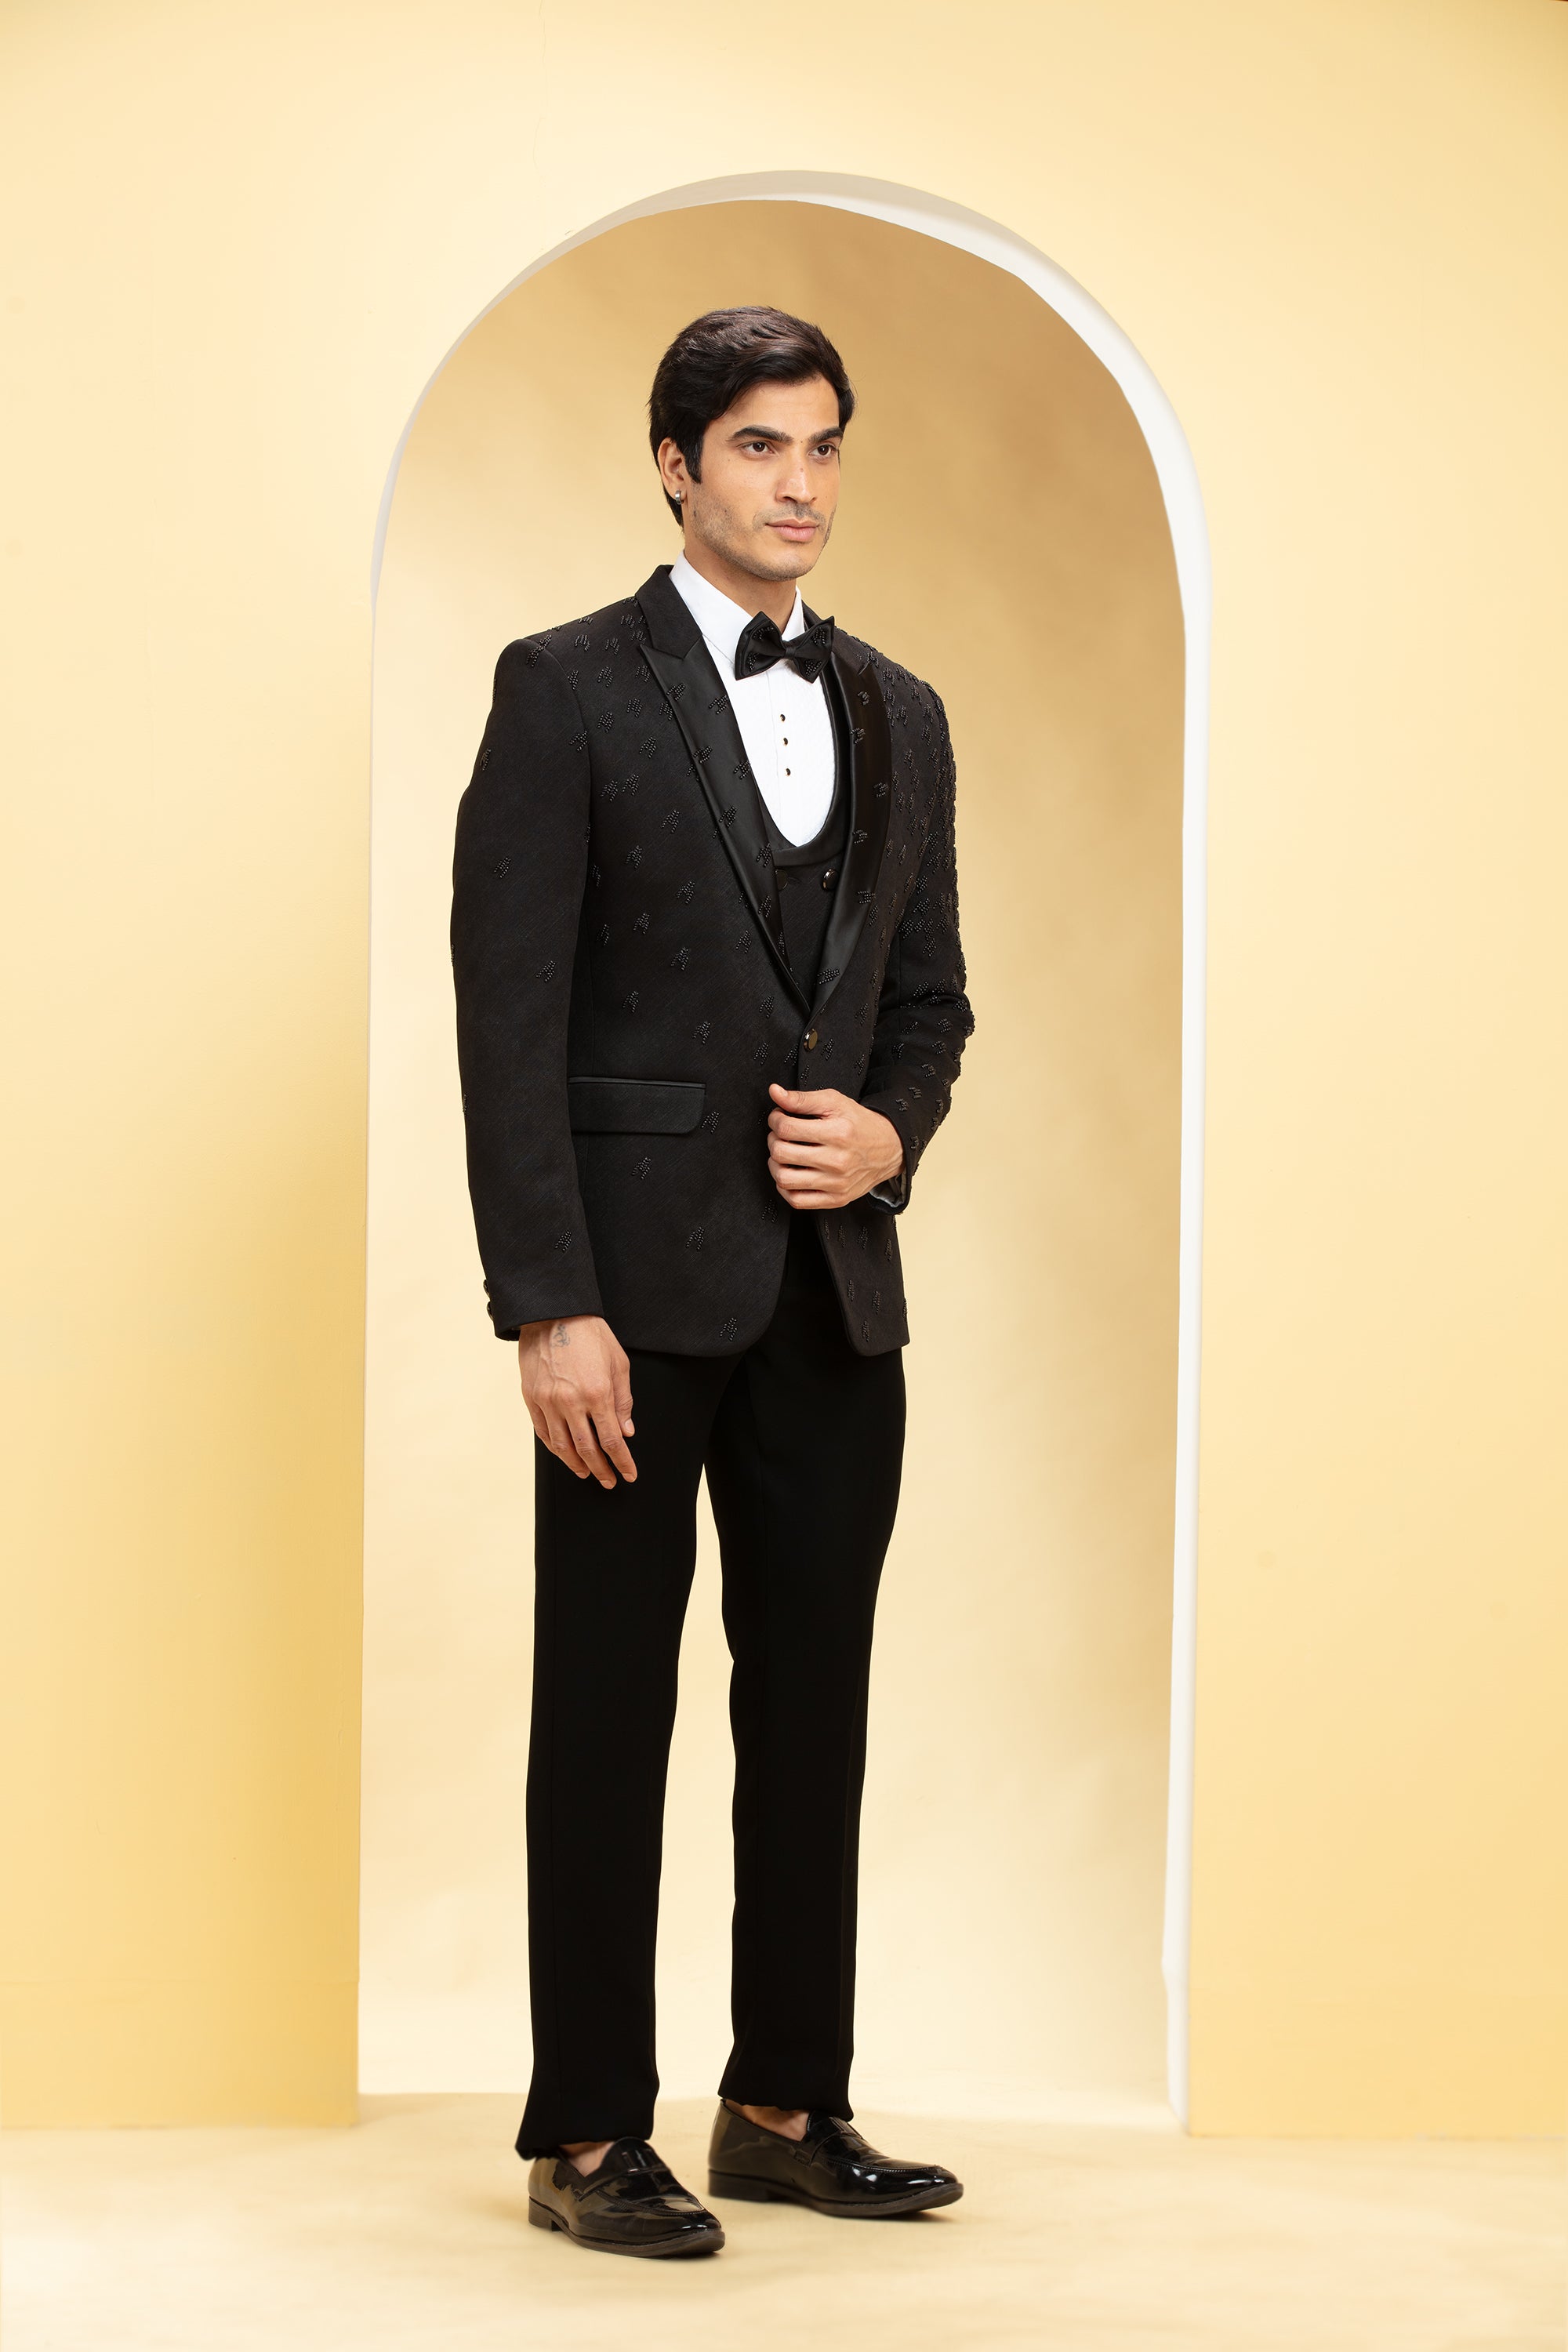 Raven Black Suede Tuxedo Set and Bow tie with Self cutdana work